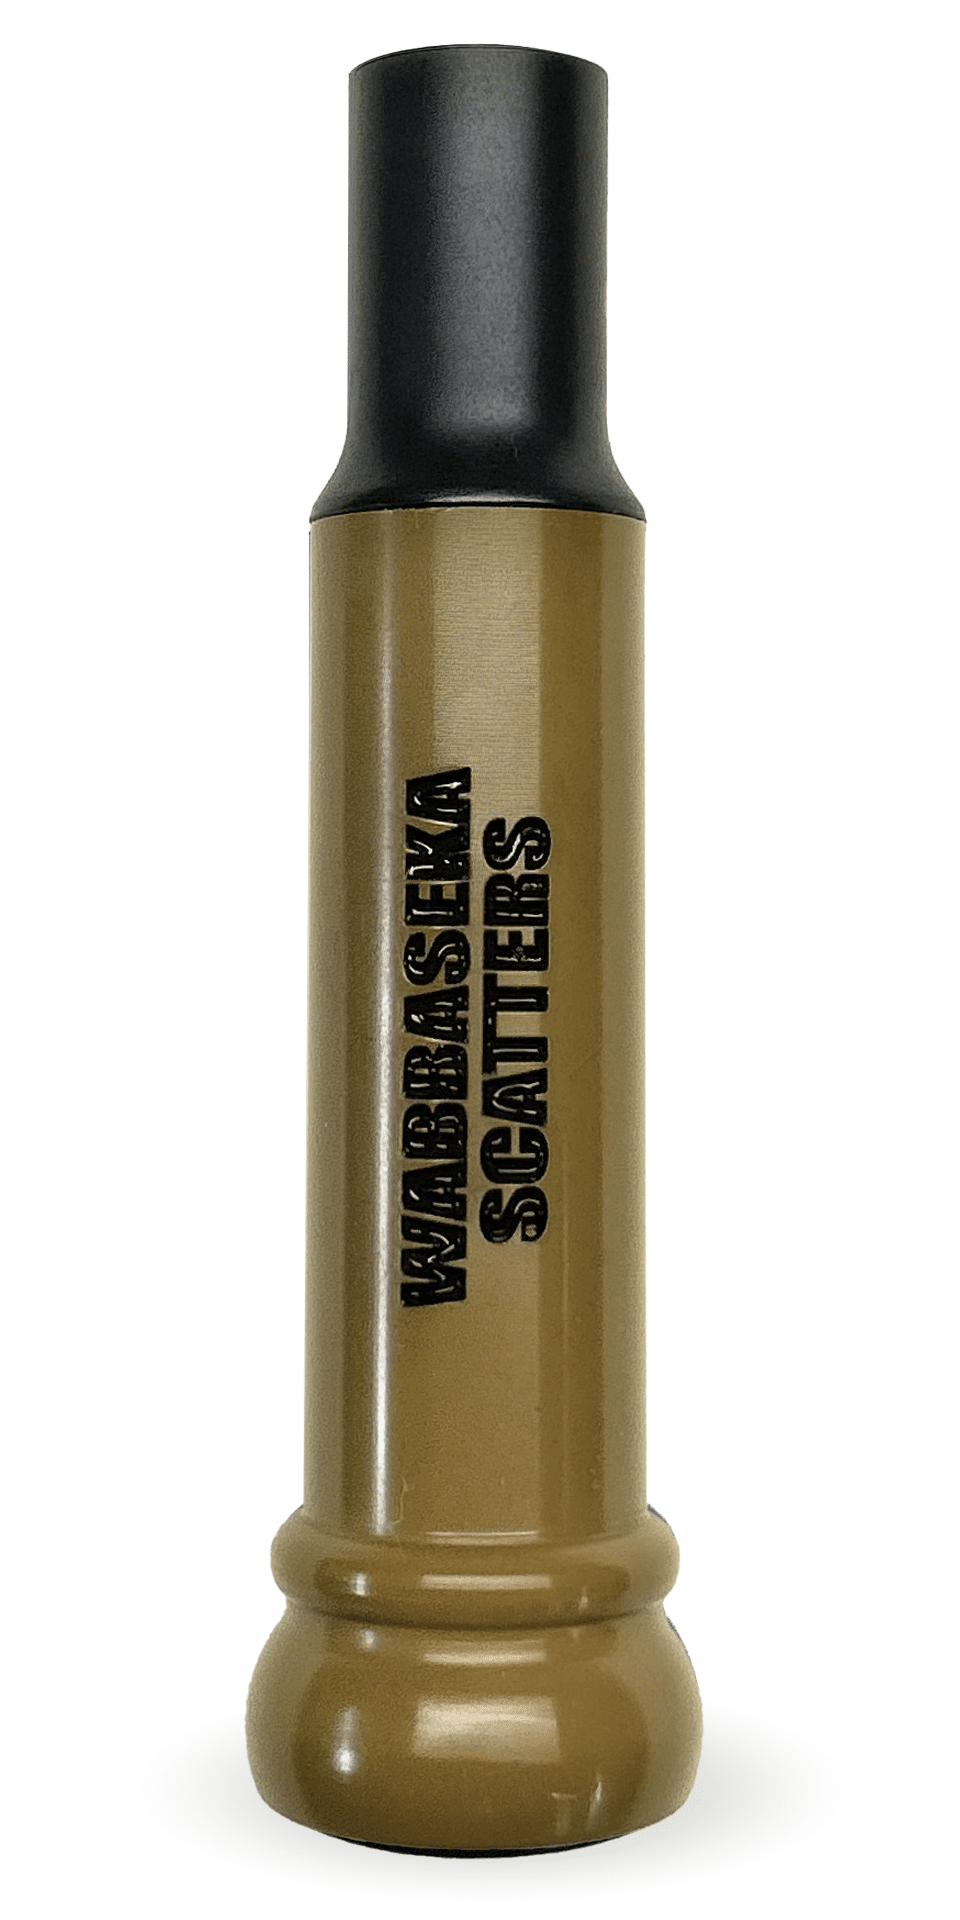 Wabbaseka Scatters Edition Threaded Keyhole Cut-Down Duck Call Elevate Your Waterfowl Hunting Step up your waterfowl hunting game with the Wabbaseka Scatters Edition Threaded Keyhole Cut-Down Duck Call in a rugged Olive Drab finish. Crafted with precision in the USA from durable hard-cast acrylic, this exceptional call pays homage to the rich hunting heritage of the Bottoms of Bayou Meto, Arkansas. Key Features Outstanding Sound Quality: Designed by the legendary Kirk McCullough, this duck call produces superior sound quality with impressive volume. Its smooth and easy-to-blow operation ensures a seamless experience for hunters of all skill levels. Authentic Keyhole Design: Featuring a true keyhole-style insert with an aggressive cut, this call delivers distinctive and realistic sounds, providing an immersive hunting experience. The 14 Mil Reed, combined with the traditional D2 Style Duck Call and Rim-Cut Tone Board, creates a harmonious blend of exceptionally loud and easy-to-blow tones. Customizable Performance: Equipped with threaded keyhole insert technology, this call ensures a secure fit and consistent performance. To further enhance your hunting experience, it includes three extra (#14) 14 Mil hand-punched Mylar reeds and a 2-inch by 3/16-inch rubberized cork strip for additional tone board wedges, allowing for personalized sound customization. Precision Craftsmanship: Every Wabbaseka Scatters Edition call is meticulously designed, cut, and hand-tuned by Kirk McCullough, guaranteeing unparalleled quality and performance for dedicated waterfowl enthusiasts. American-Made Excellence: Proudly made on the great Mississippi flyway in Arkansas, this duck call stands as a symbol of precision, durability, and the rich tradition of American craftsmanship. Highlights Tribute to Tradition: The Wabbaseka Scatters Edition honors the esteemed waterfowl hunting traditions of Bayou Meto with its exceptional design and craftsmanship. User-Friendly Design: Balancing ease of use with impressive loudness, this call is suitable for hunters of all ages and experience levels, making it an ideal starter for newcomers to waterfowl hunting. Versatile and Reliable: With its customizable features and dependable performance, the Wabbaseka Scatters Edition is an essential tool for any serious duck hunter. Experience the excellence and tradition of waterfowl hunting with the Wabbaseka Scatters Edition Threaded Keyhole Cut-Down Duck Call in Olive Drab. More than just a hunting tool, it’s a symbol of dedication, heritage, and unmatched performance. Join the legacy and elevate your hunting game today.